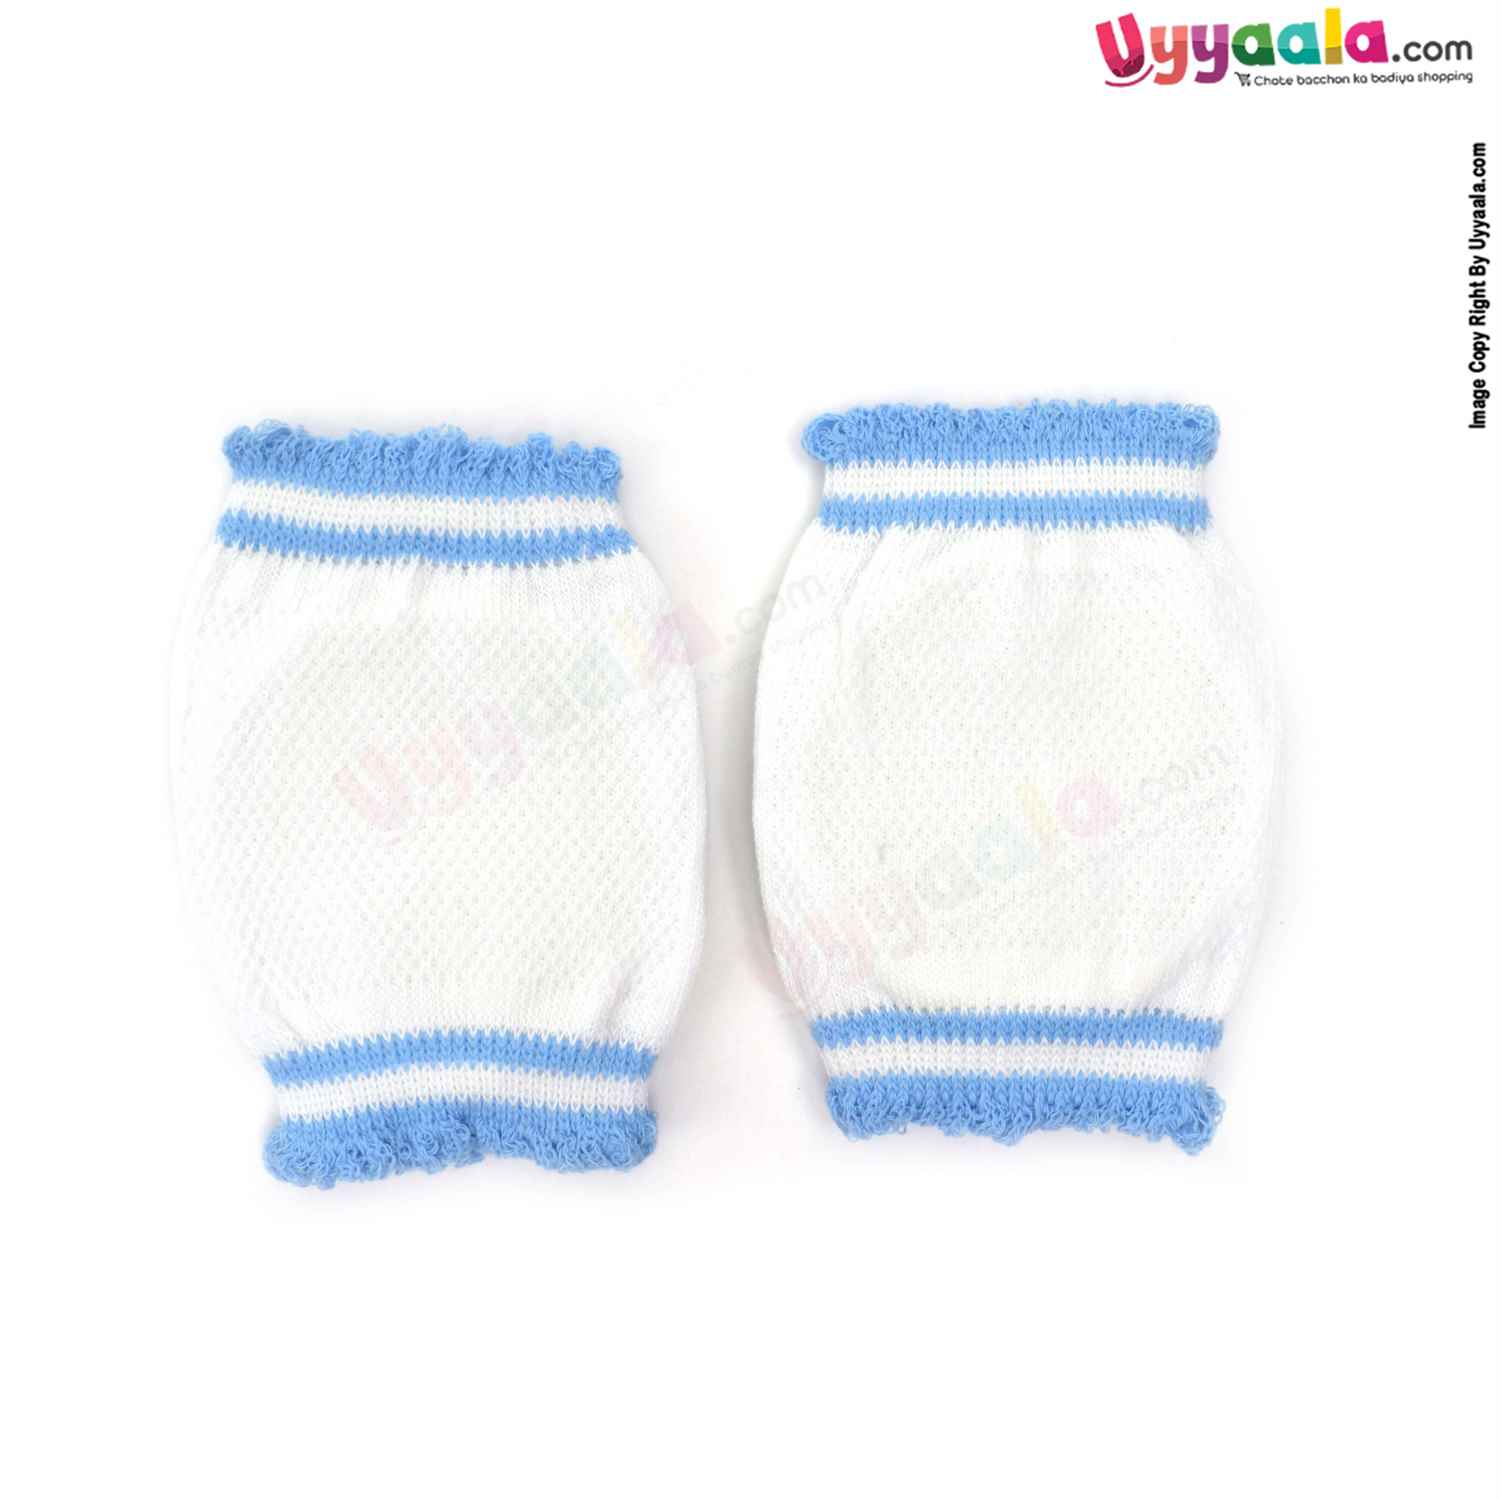 Hosiery Cotton Stretchable Knee Protection Pads for Crawling Babies with Apple Patch Pack of 1 Pair , 6m-2Y Age - White & Light Blue